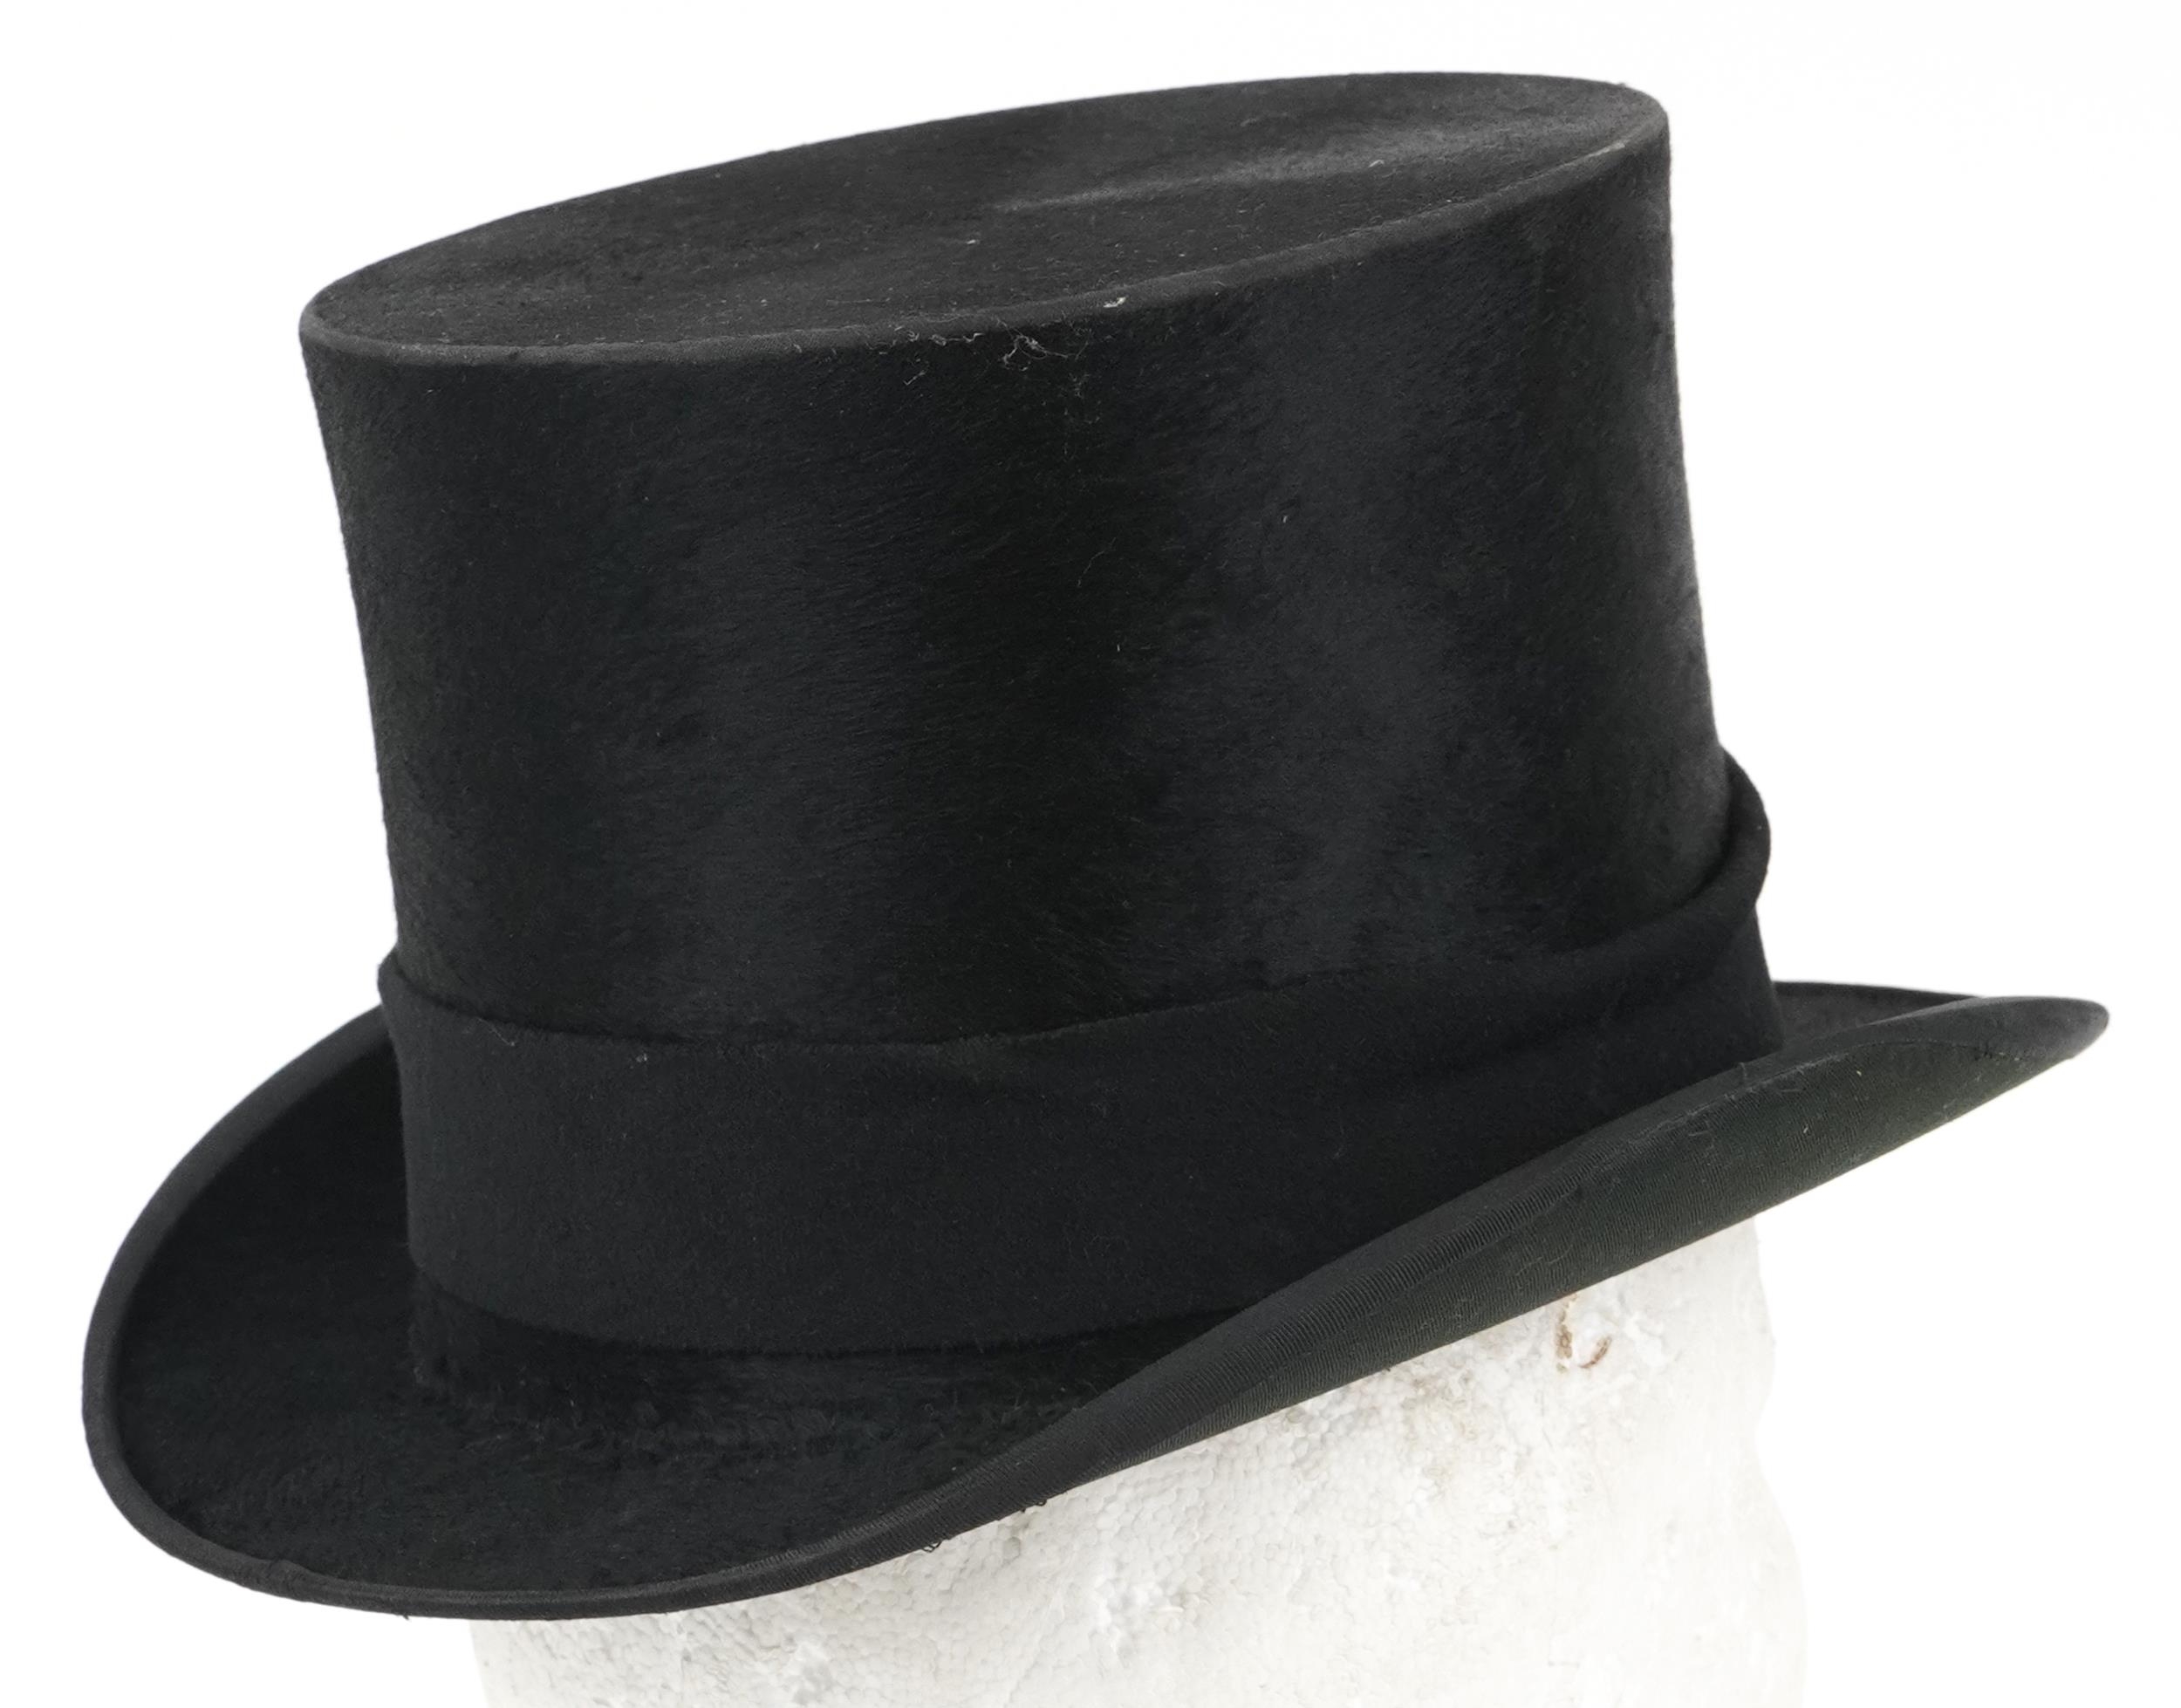 Dunn & Co of London moleskin top hat with box, size 7 - Image 3 of 4